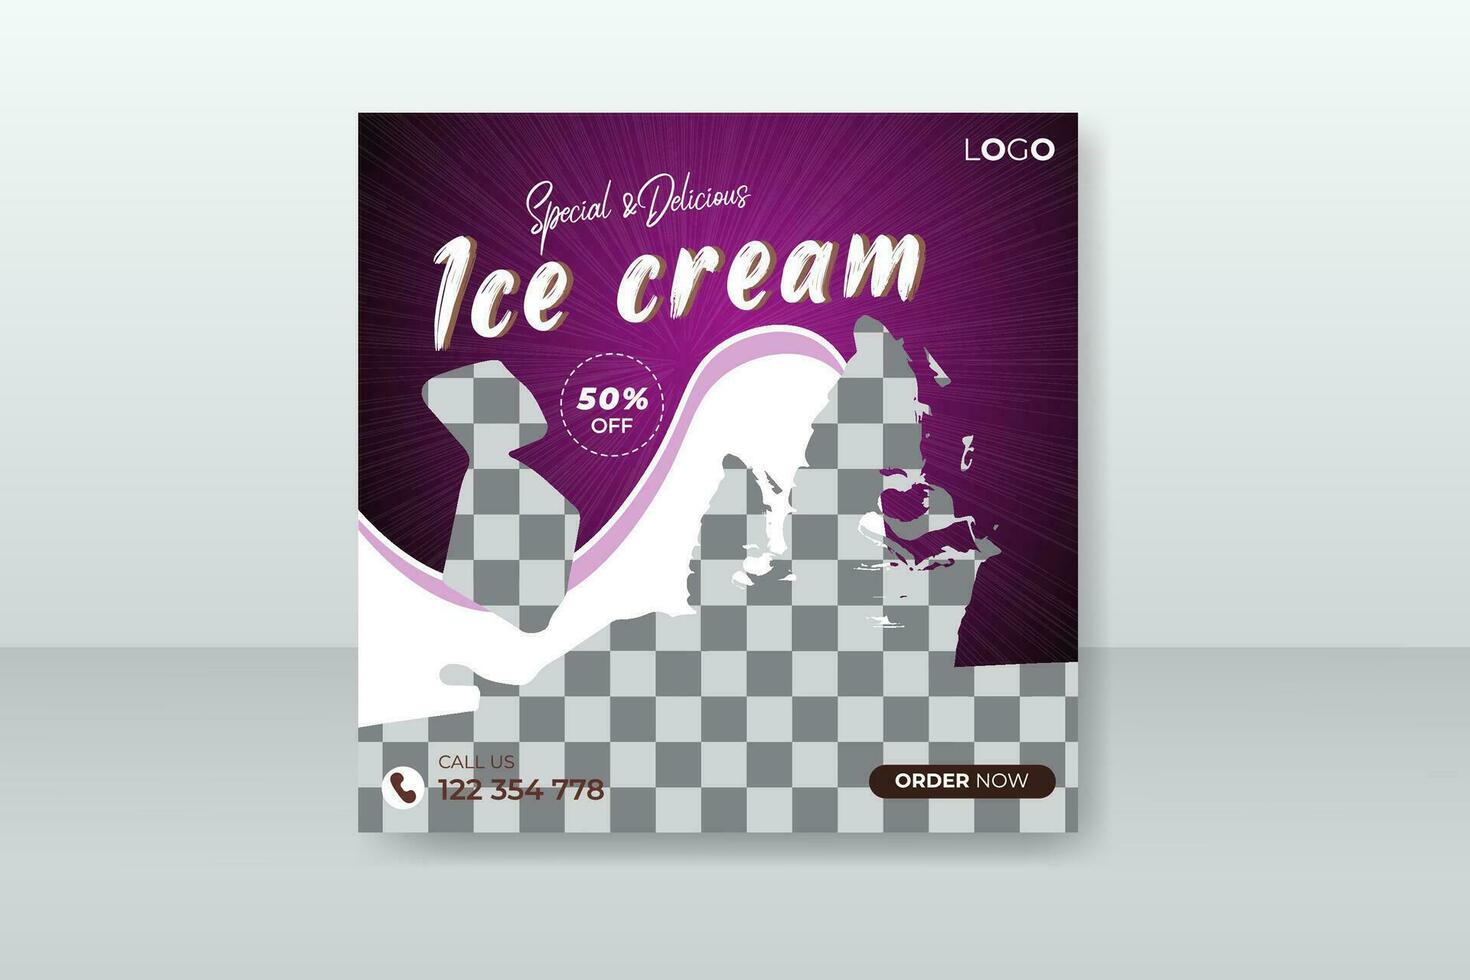 Special delicious ice cream social media post or promotional banner with discount offer abstract colorful shape vector